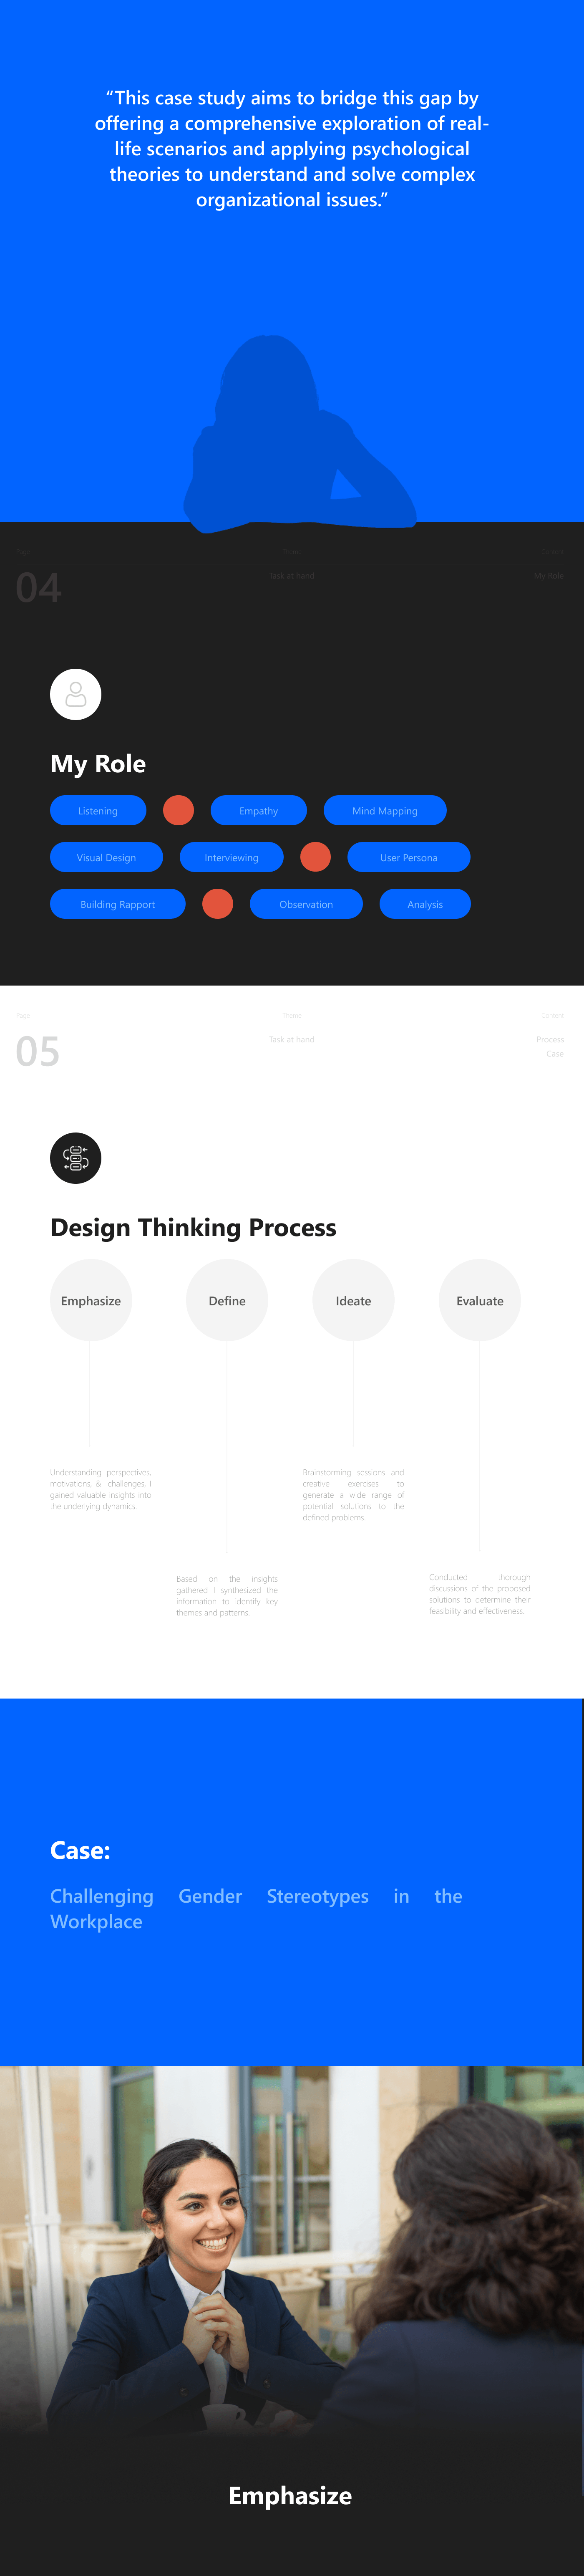 design thinking process research Project organization Leadership management power woman interview